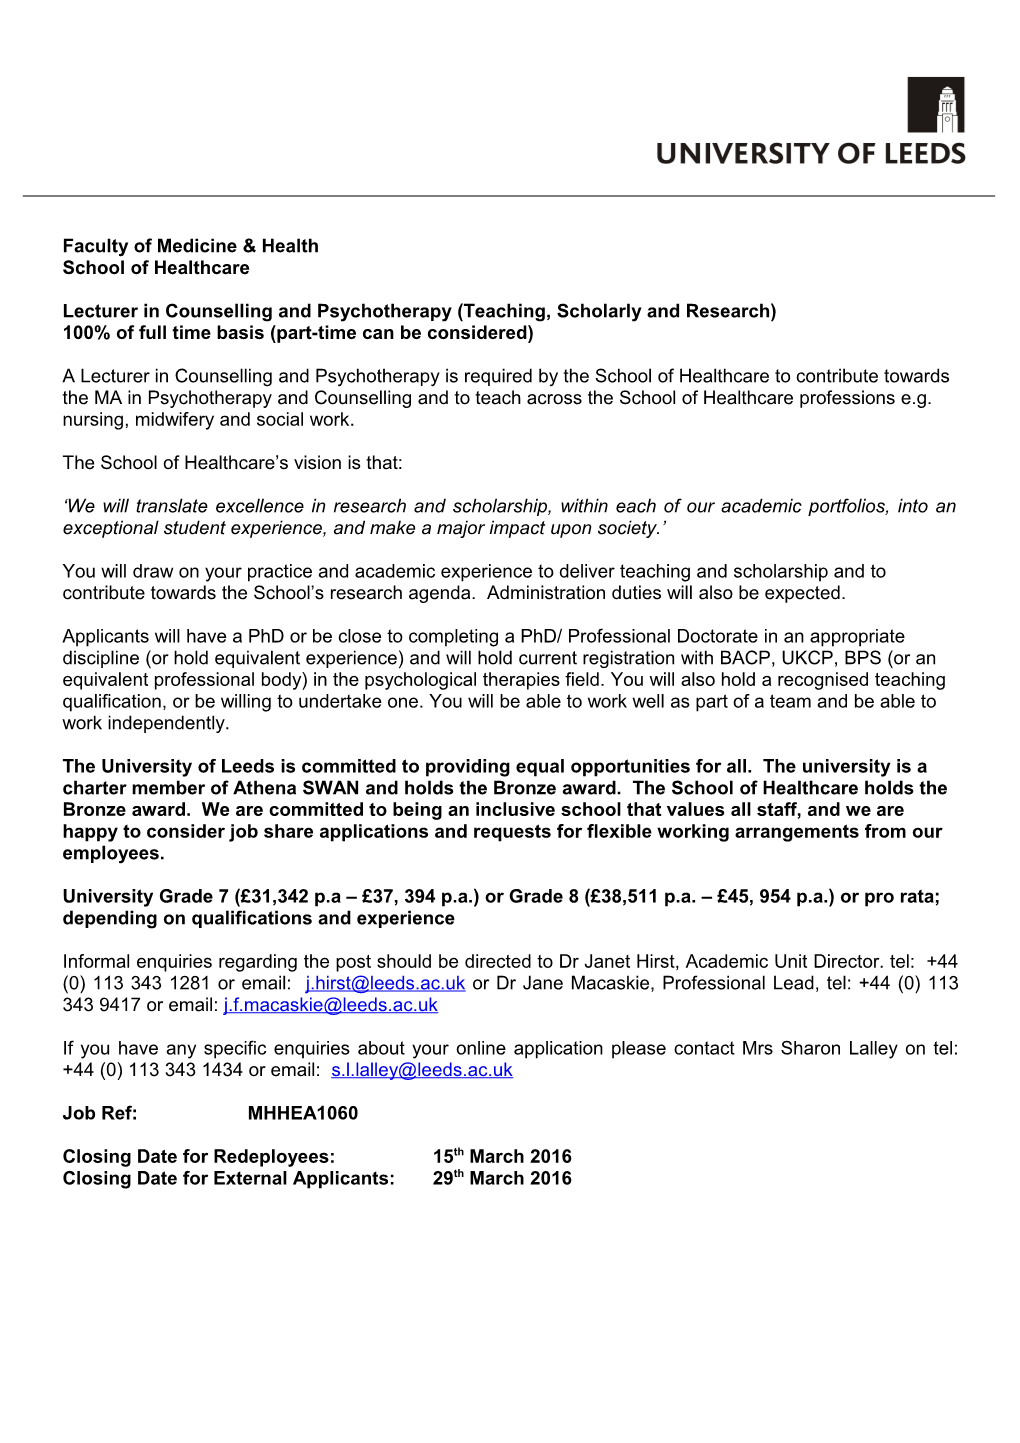 Lecturer in Counselling and Psychotherapy (Teaching, Scholarly and Research)